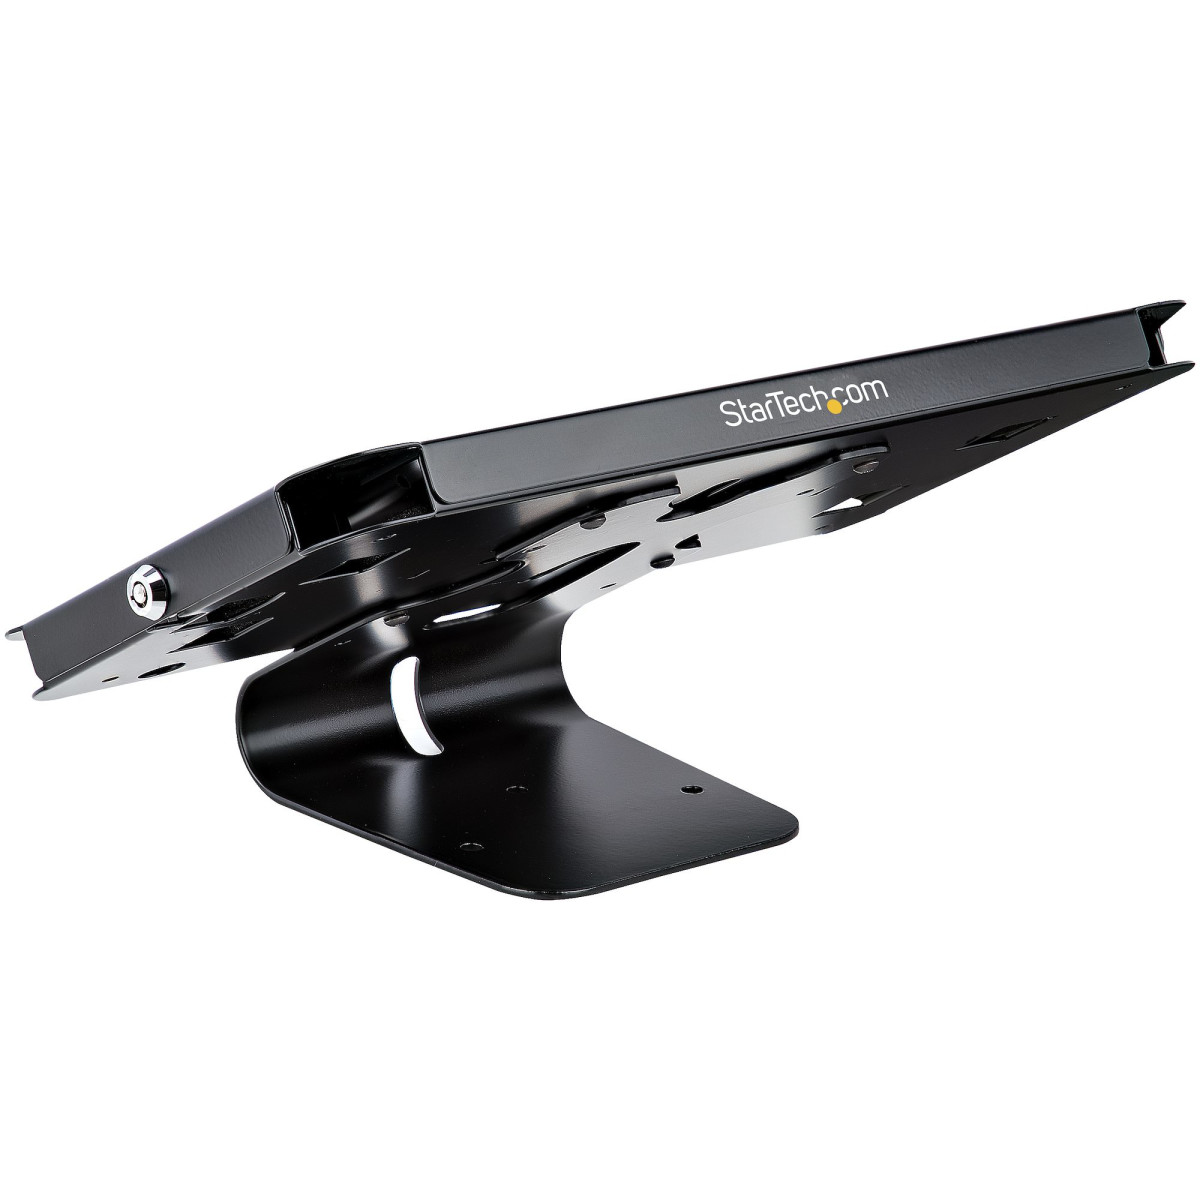 Secure Tablet Stand Up To 26.7cm